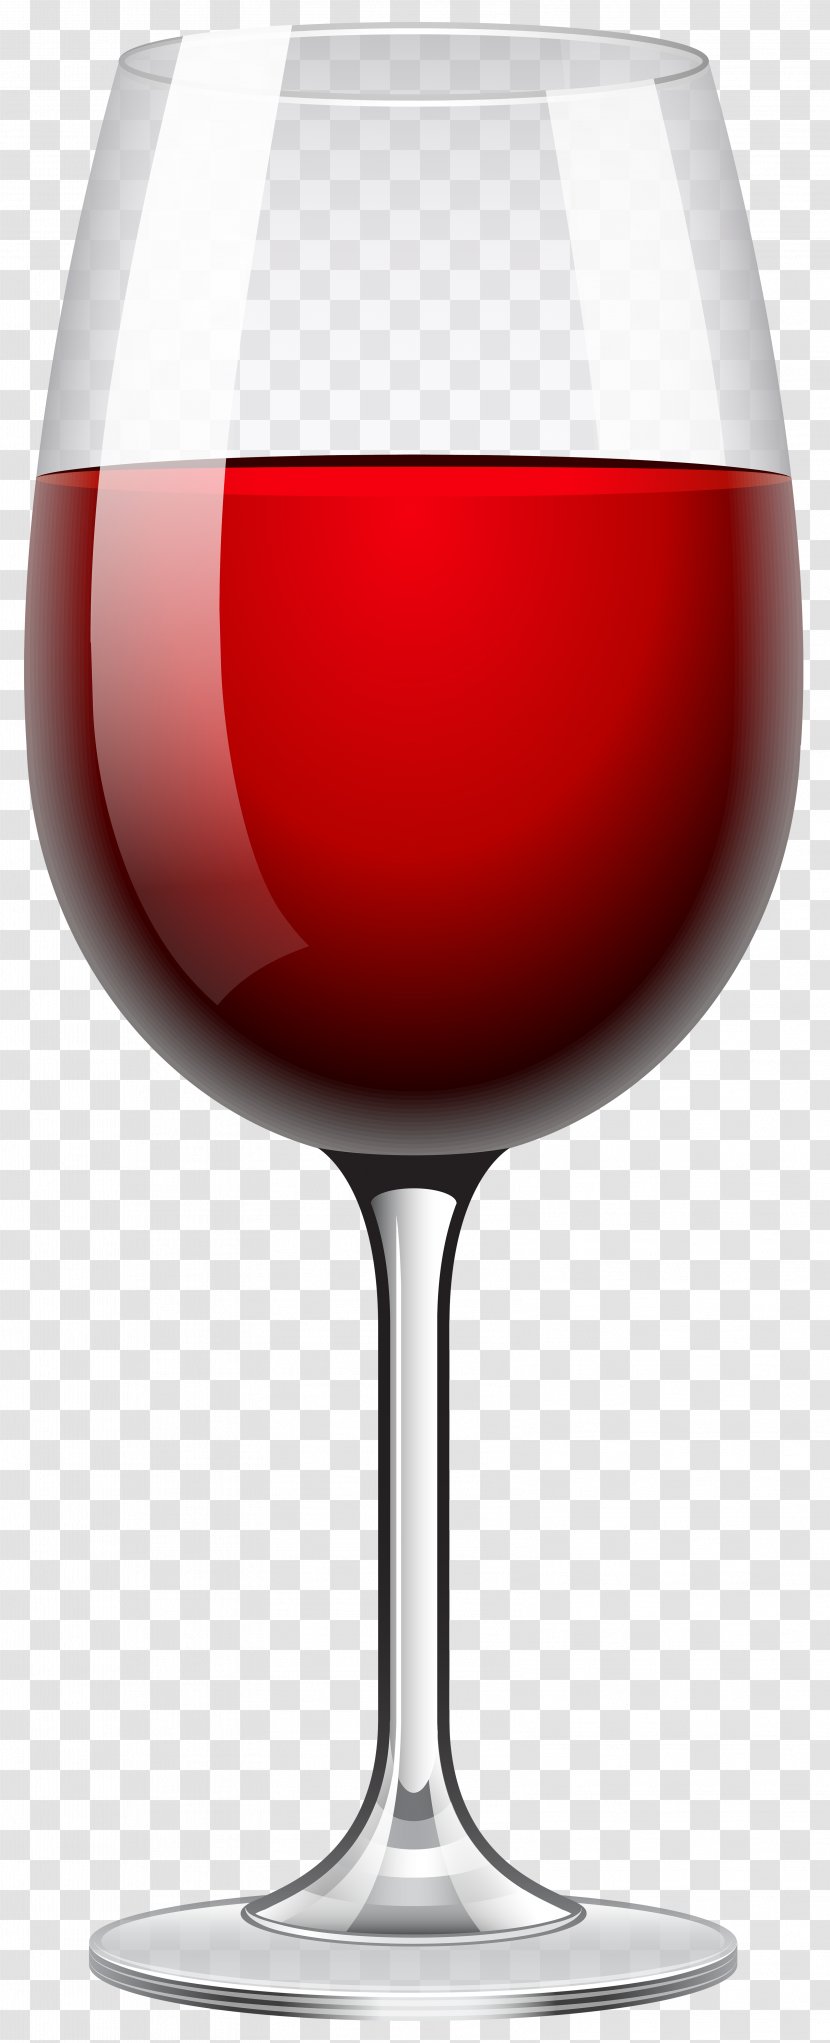 Red Wine White Champagne Glass - Transparent Clip Art Image Transparent PNG